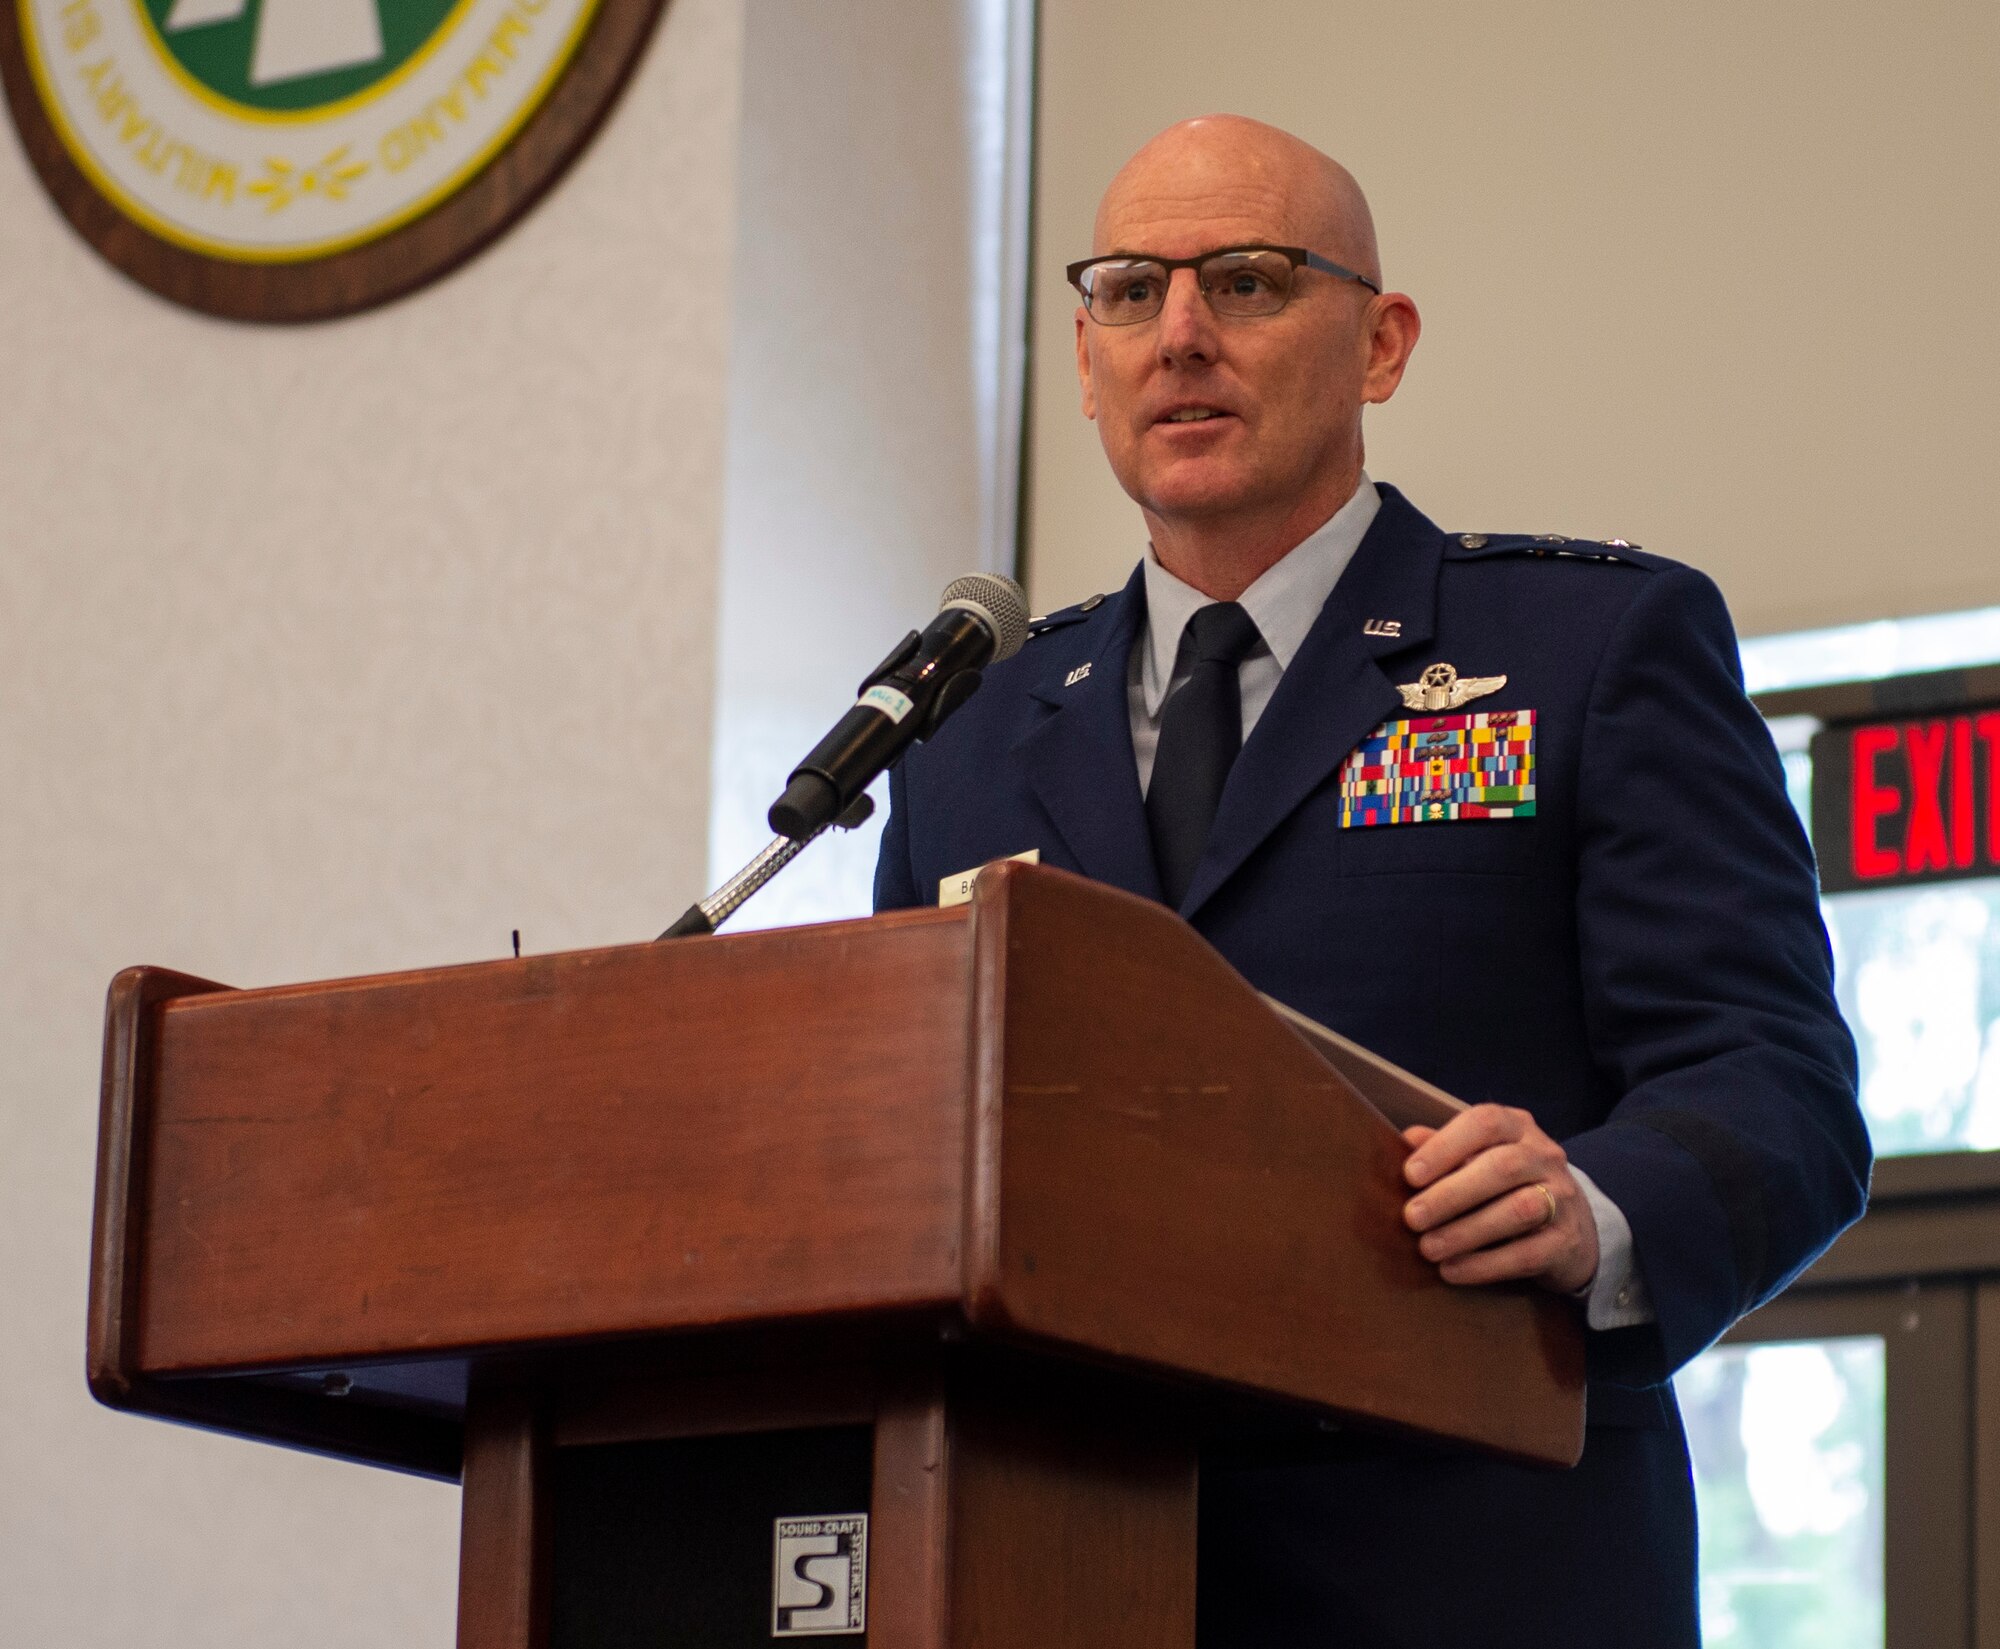 Maj. Gen. Sam Barrett, 18th Air Force Commander, speaks to the audience during the 18th AF Change of Command Ceremony July 31, at Scott Air Force Base, Ill. Barrett comes to 18 AF from his position as the Director of operations, Strategic Deterrence and Nuclear Integration, Headquarters Air Mobility Command, Scott AFB. (U.S. Air Force photo by Airman 1st Class Chad Gorecki)